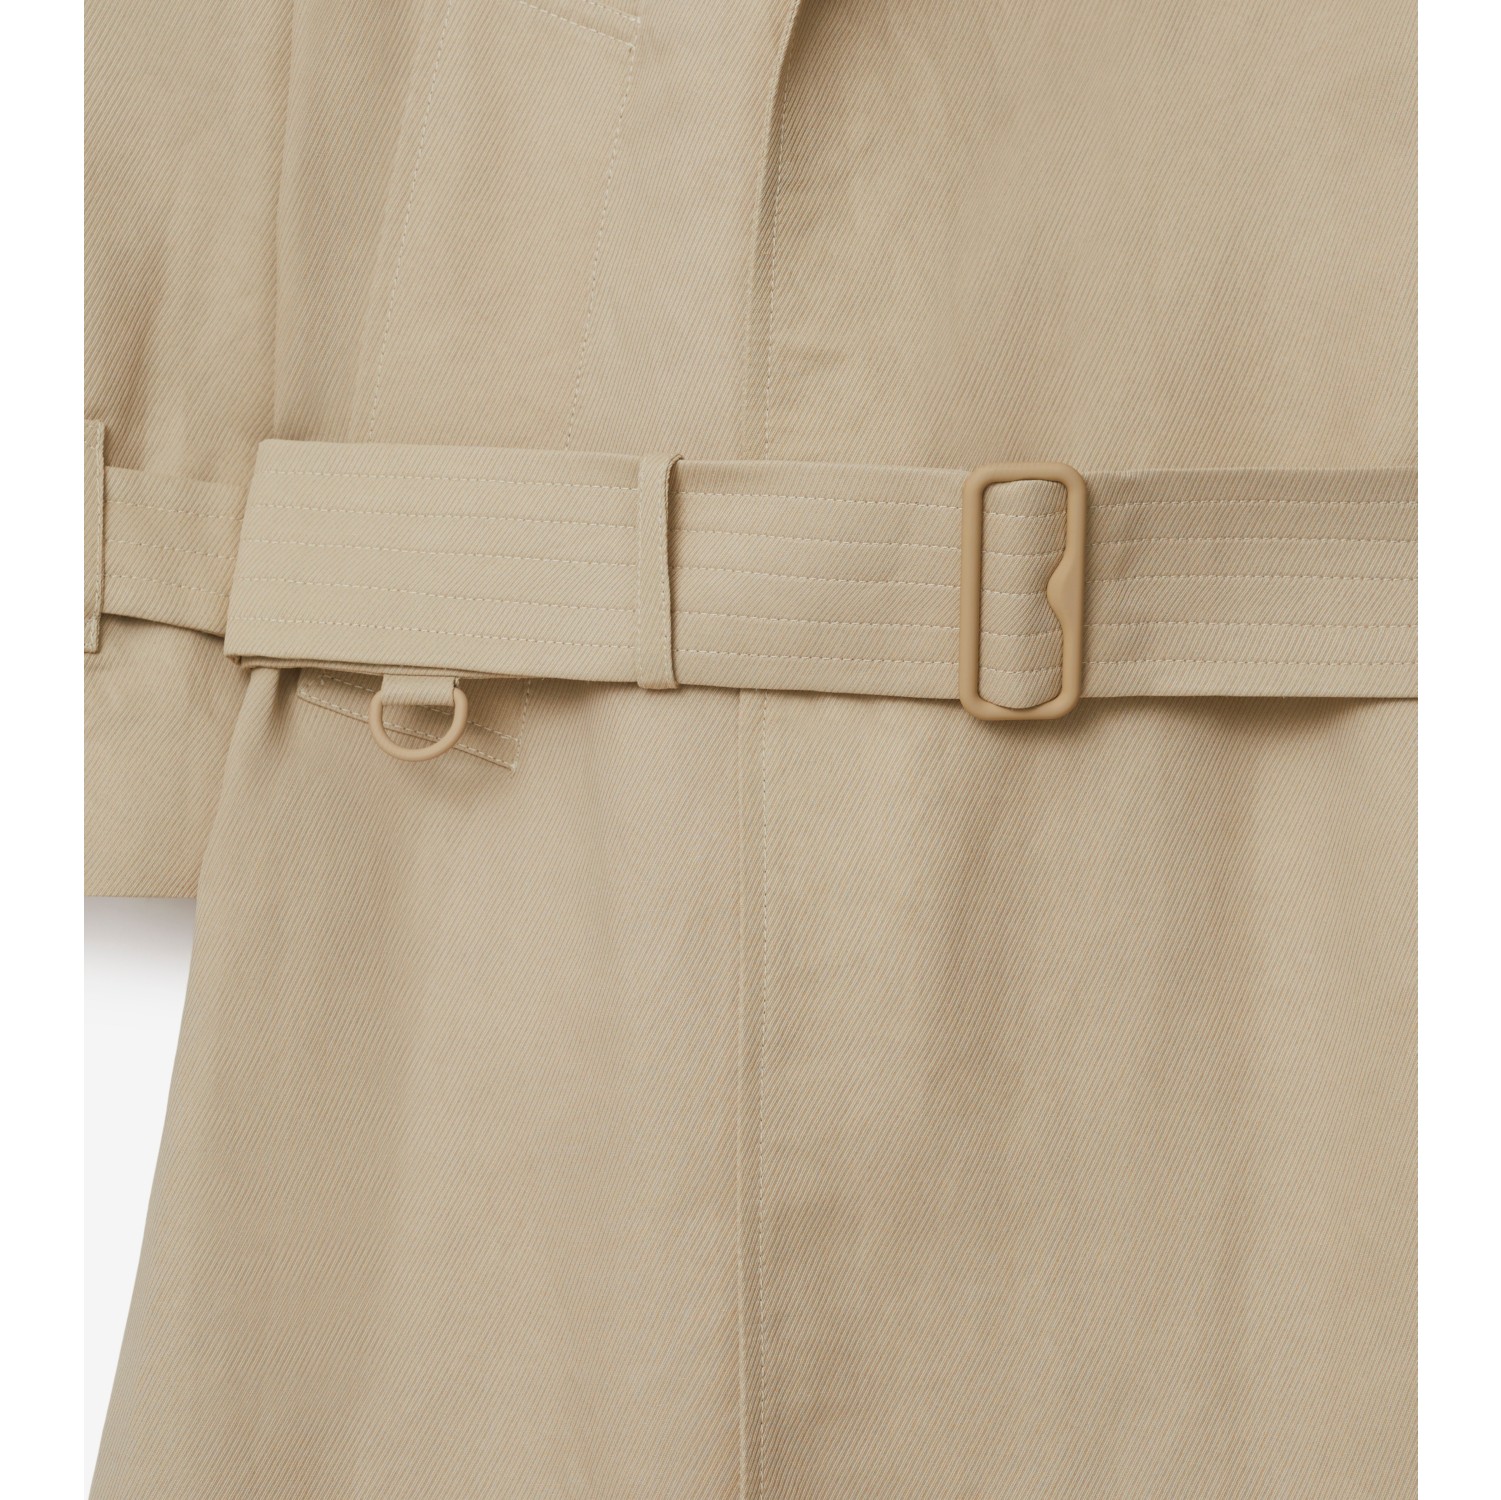 Long Tricotine Trench Coat